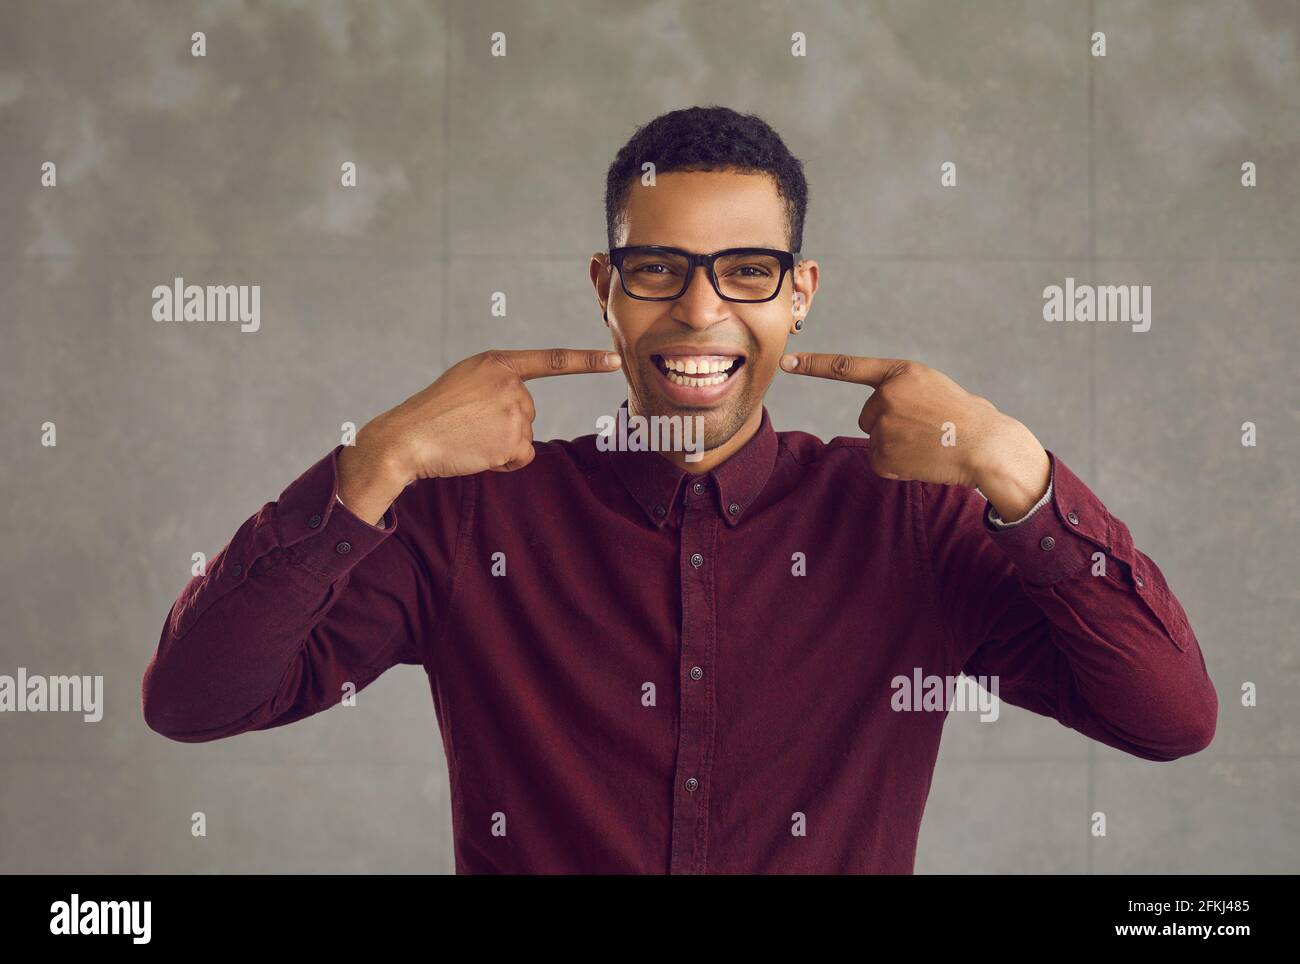 Young african american man pointing showing white teeth smile studio shot Stock Photo